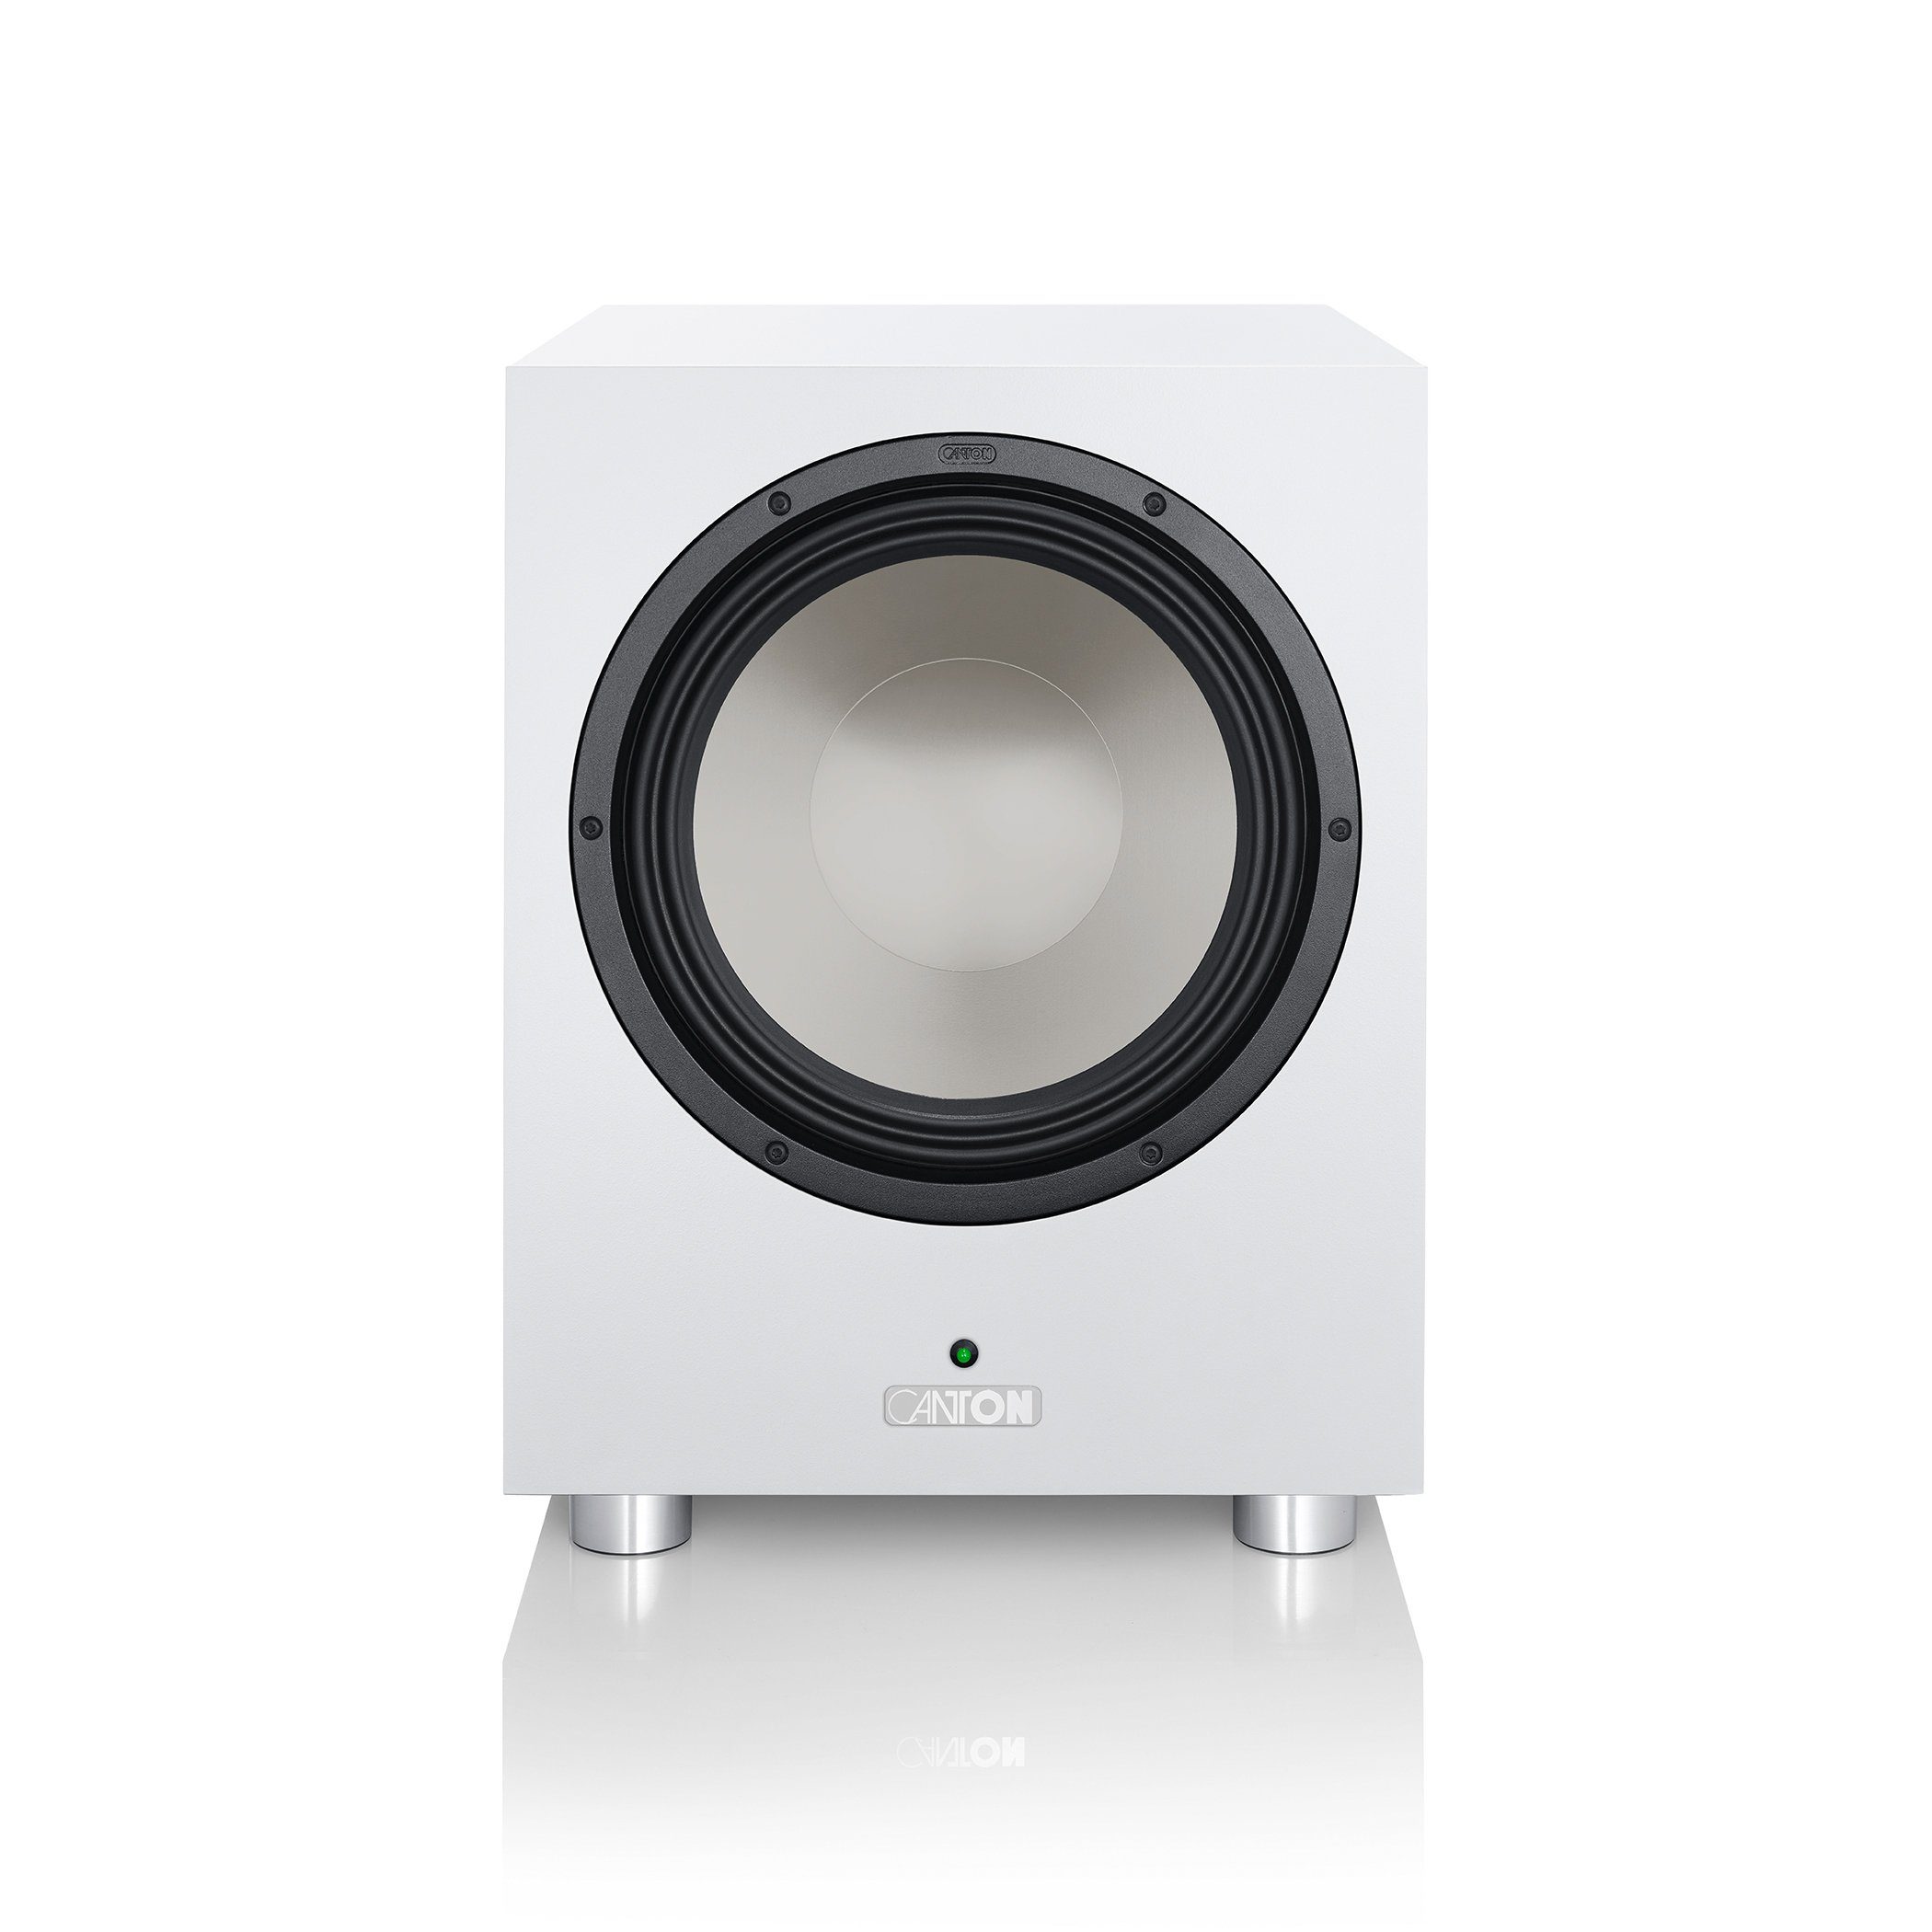 CANTON Power Sub 10 weiss Subwoofer | Subwoofer